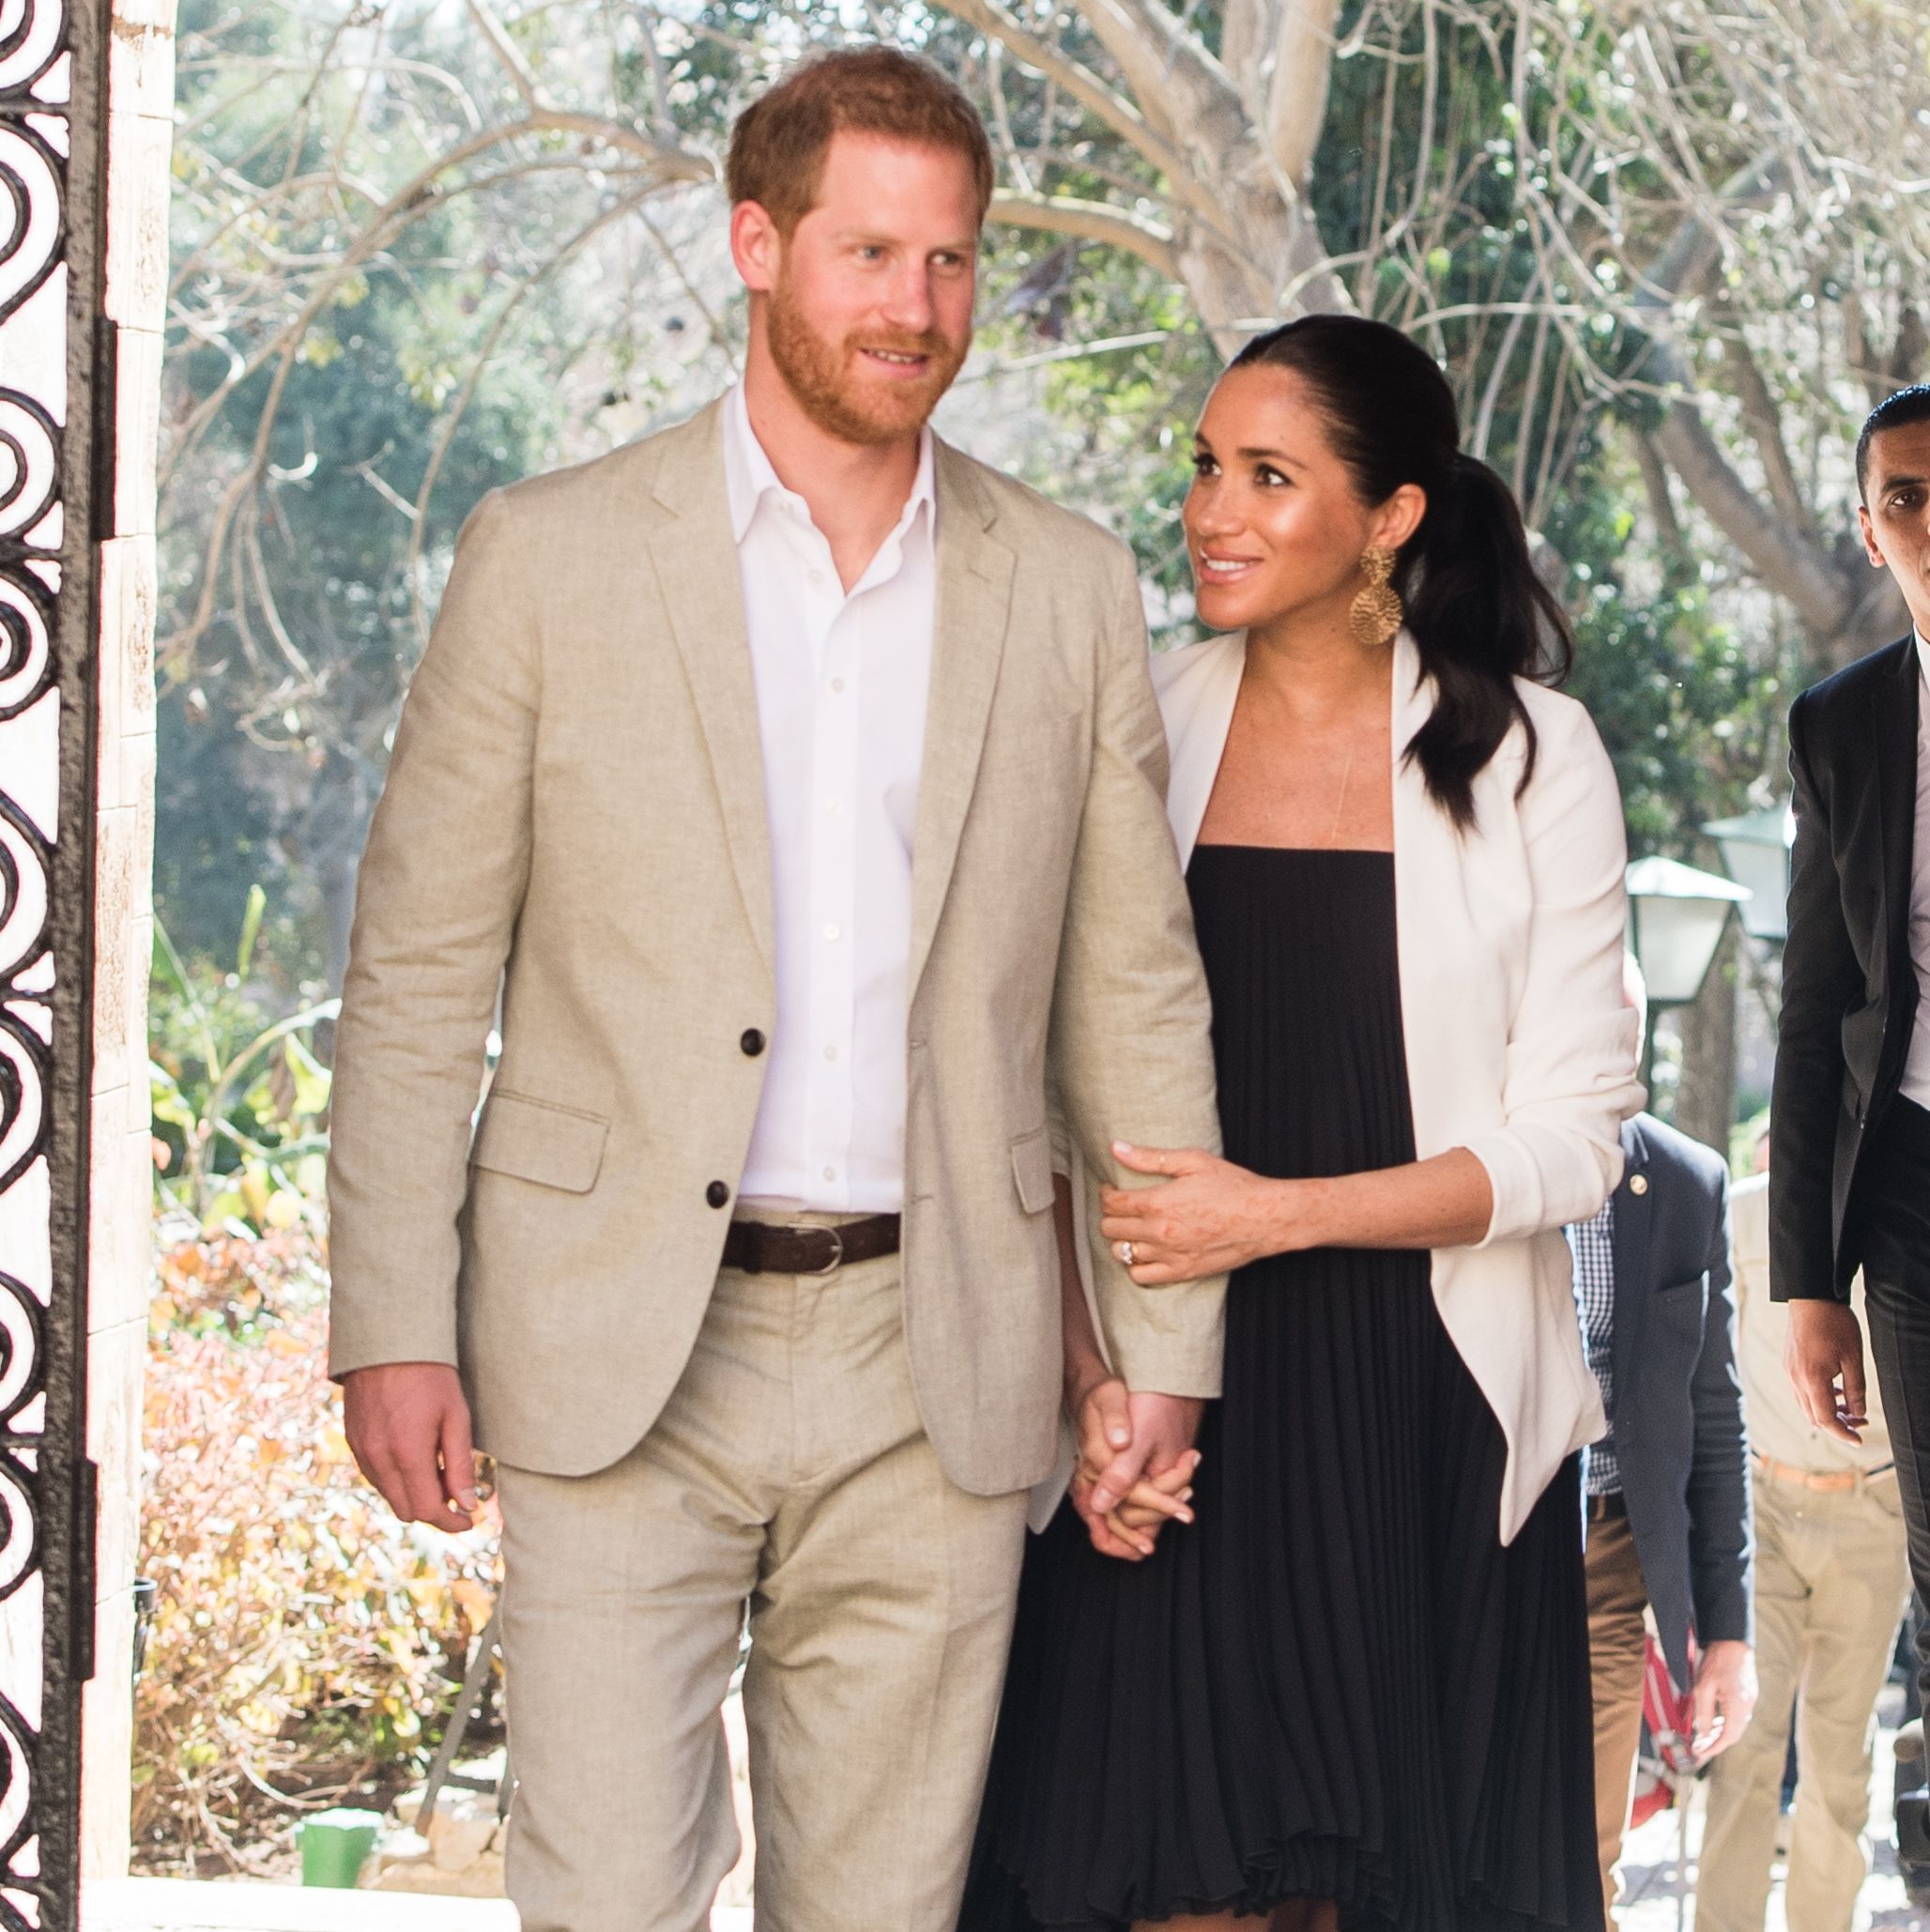 Prince Harry and Meghan Markle Might Attend a Star-Studded Celeb Wedding in Florida!